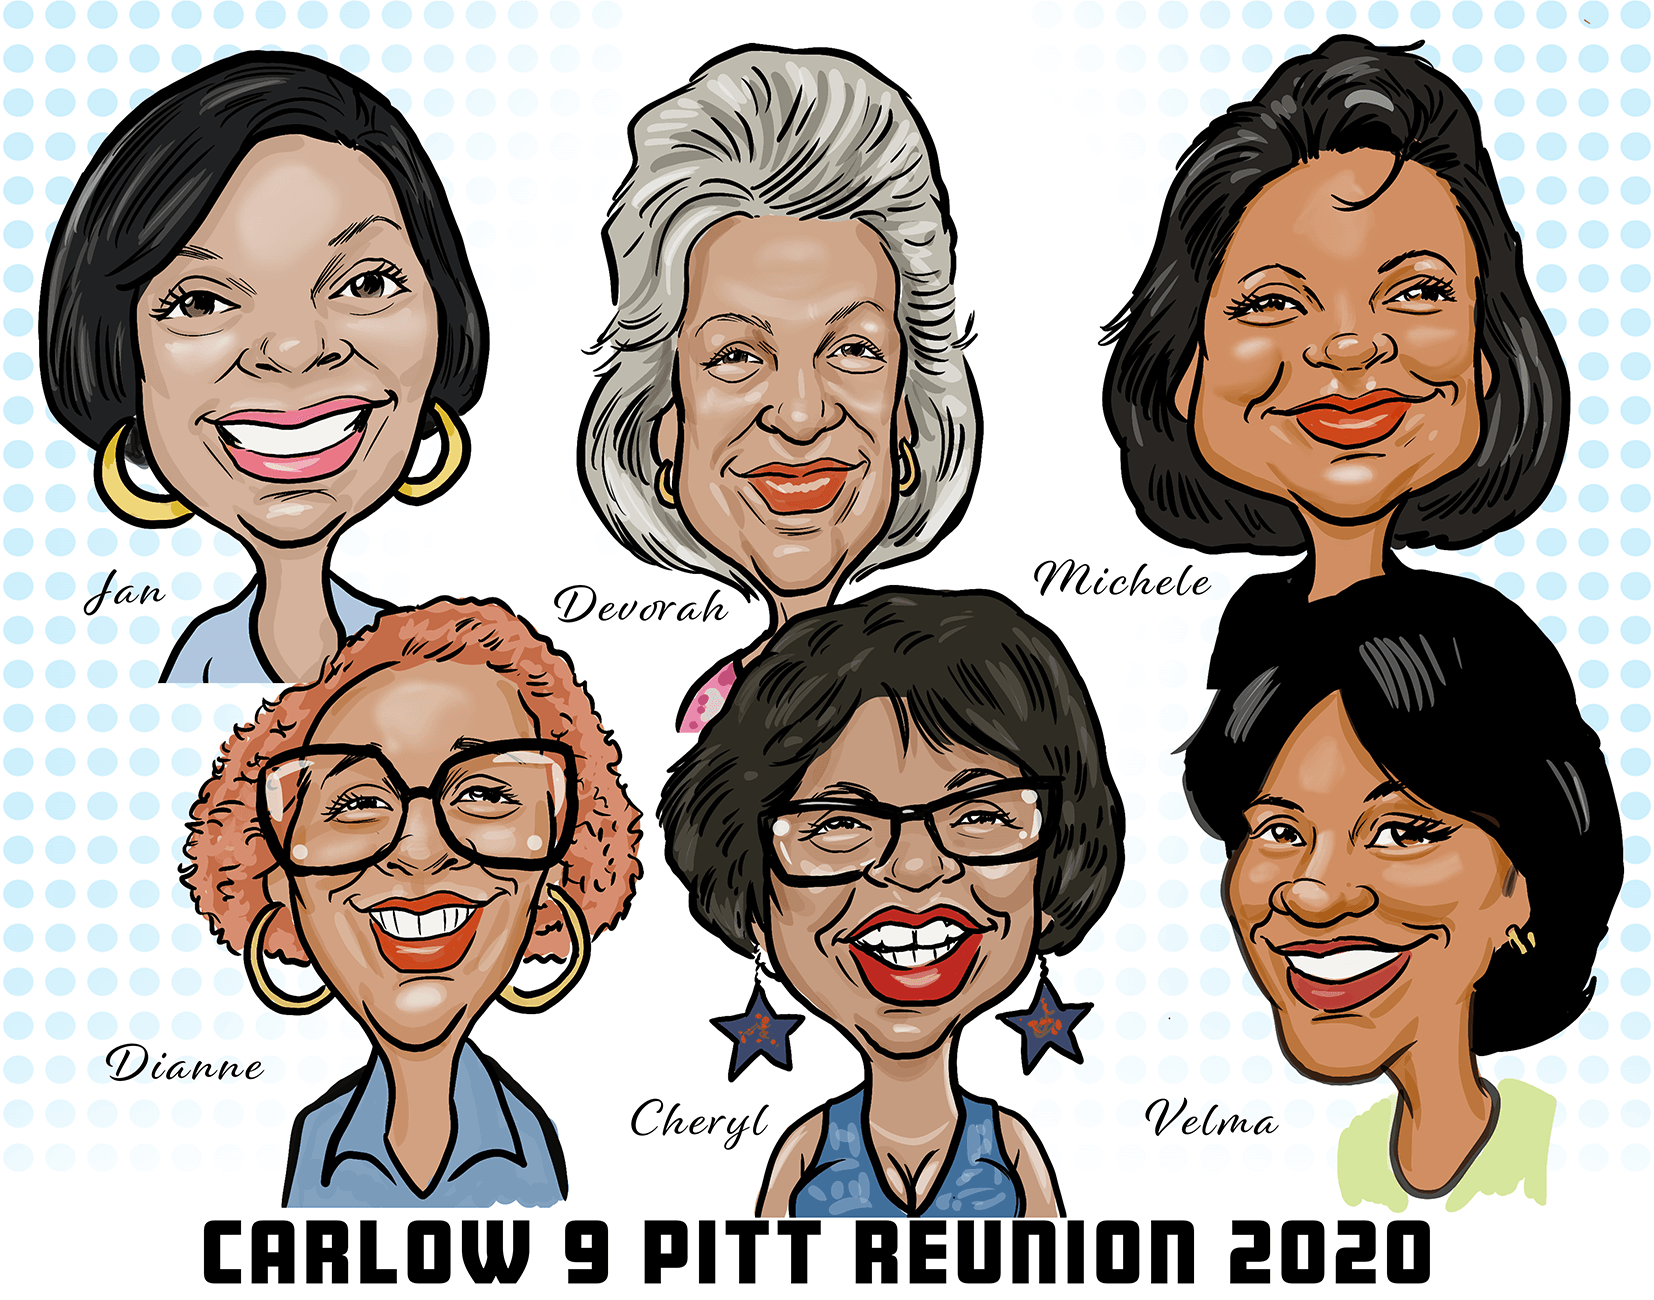 color caricature drawings of Jan, Devorah, Michele, Dianne, Cheryl and Velma of the Carlow 9, with caption "Carlow 9 Pitt Reunion 2020"